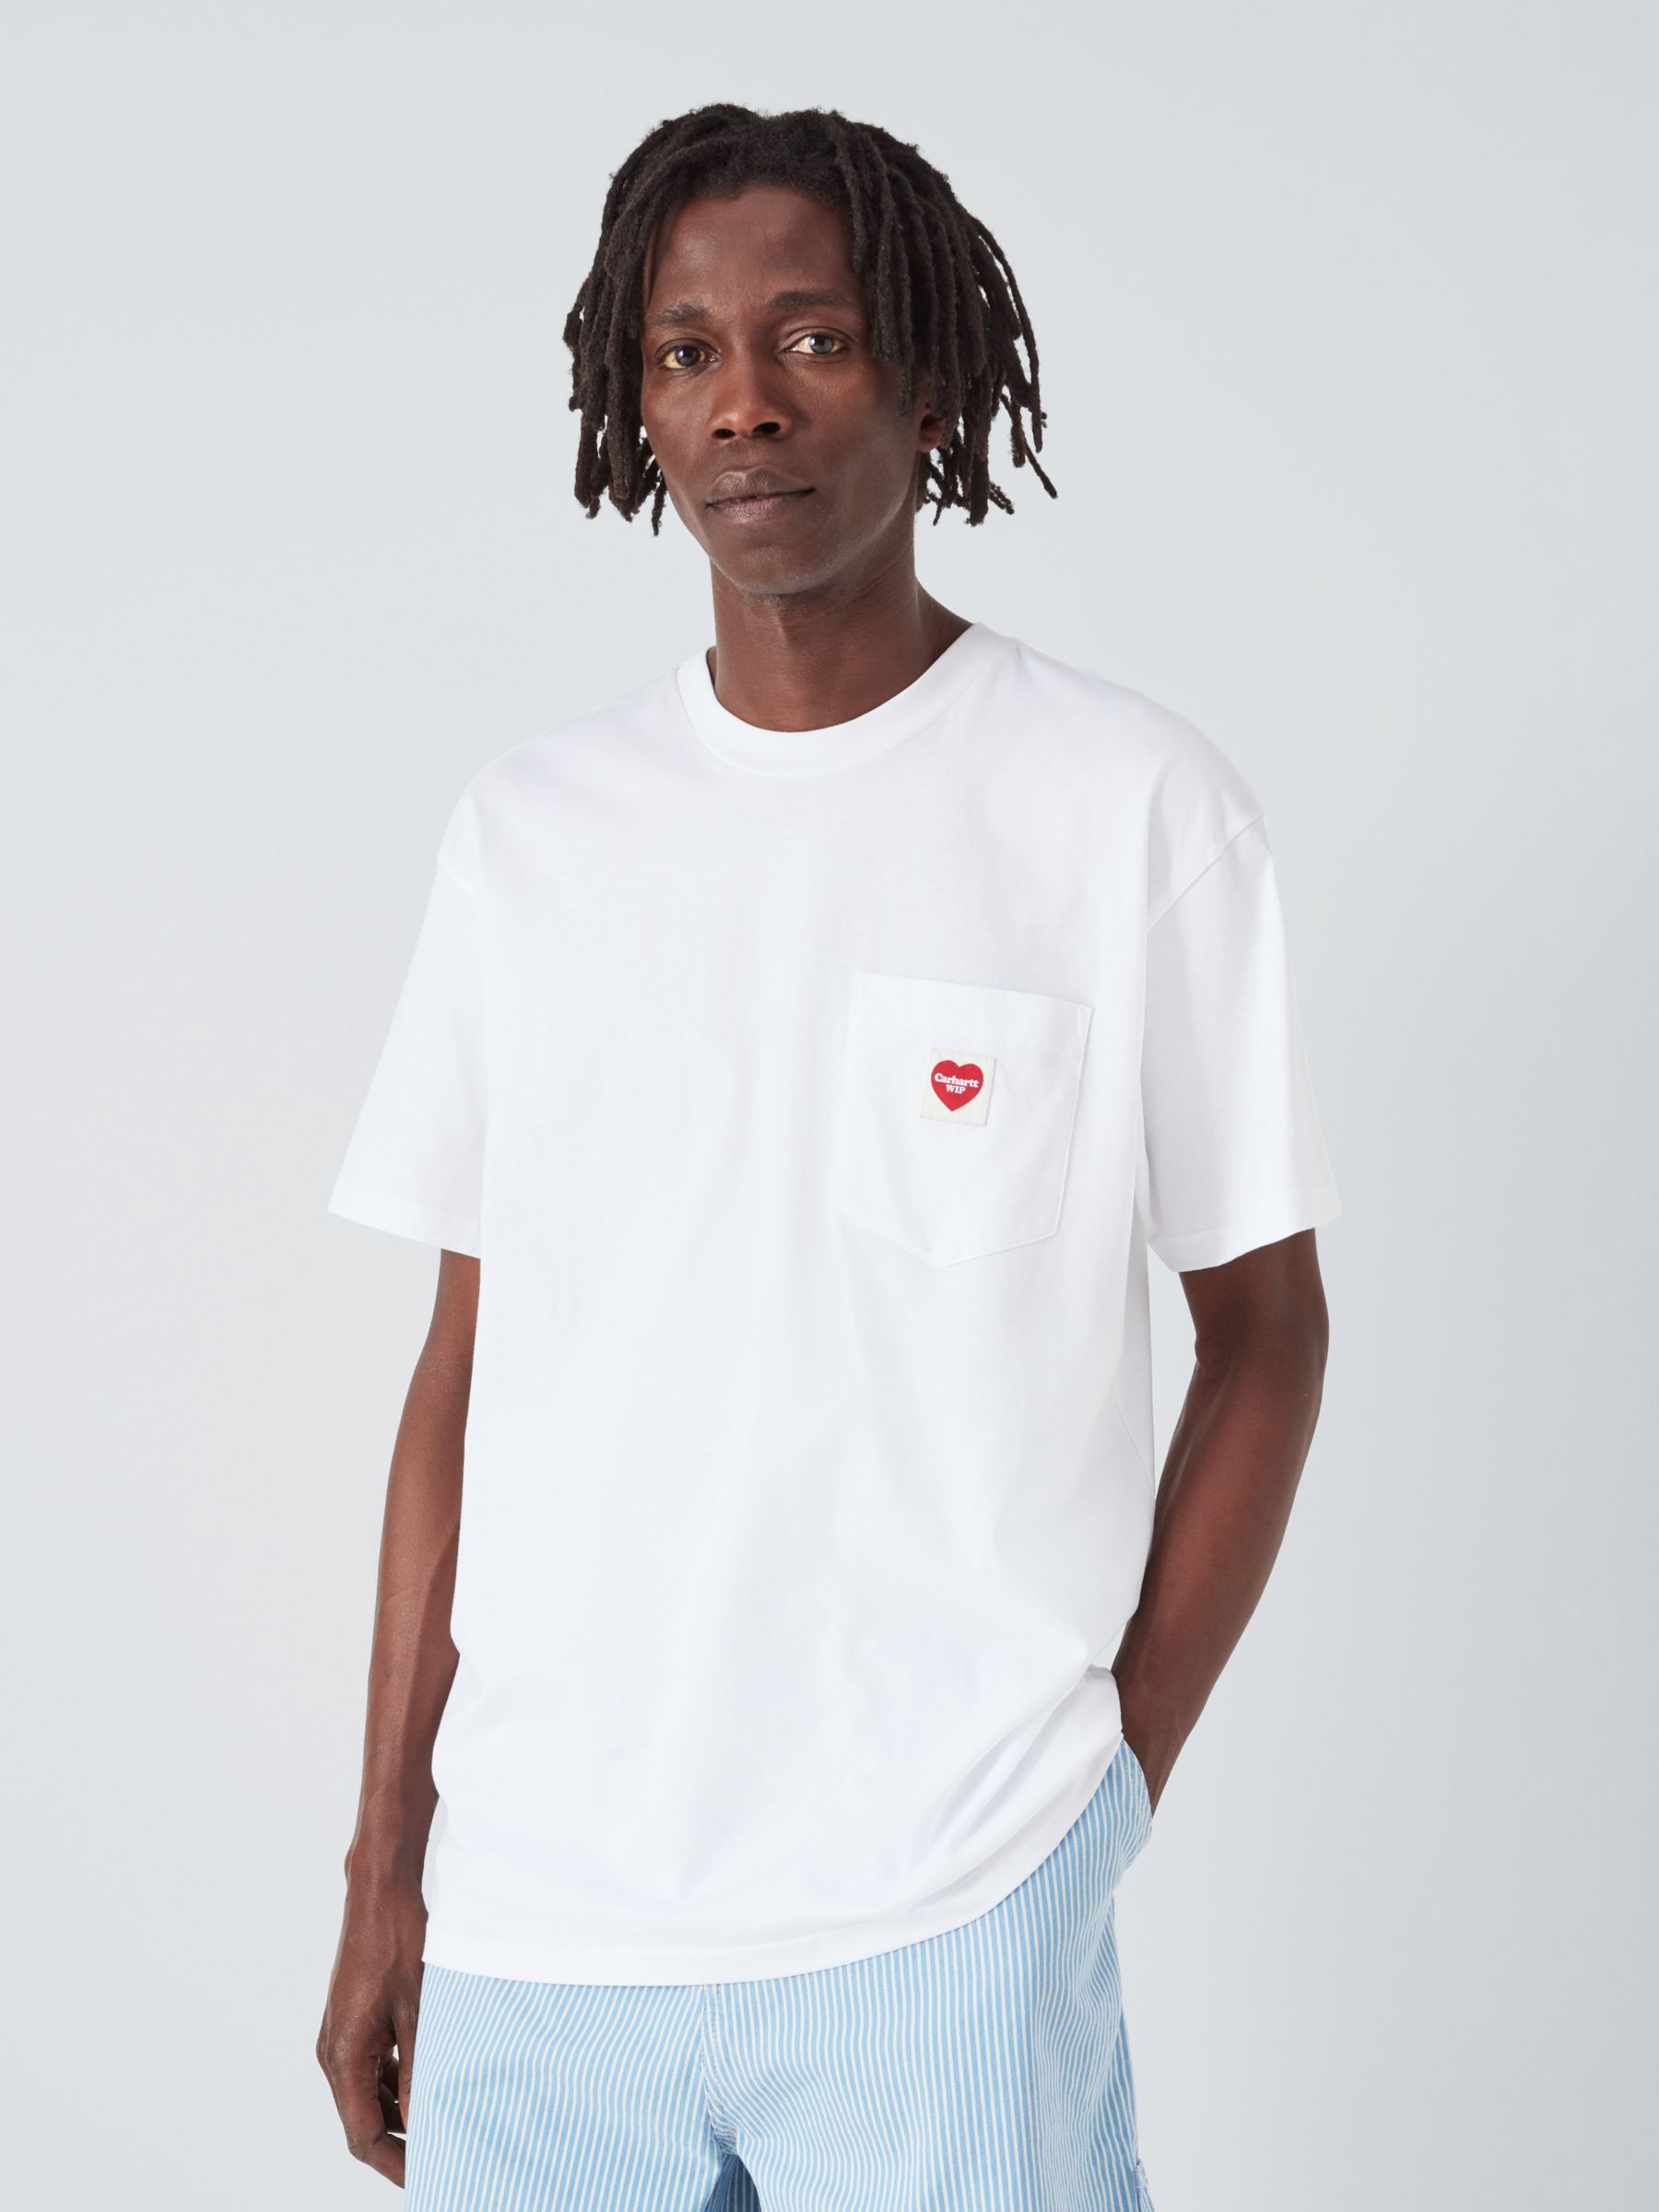 Carhartt WIP Pocket Heart T-Shirt, White at Lewis Partners